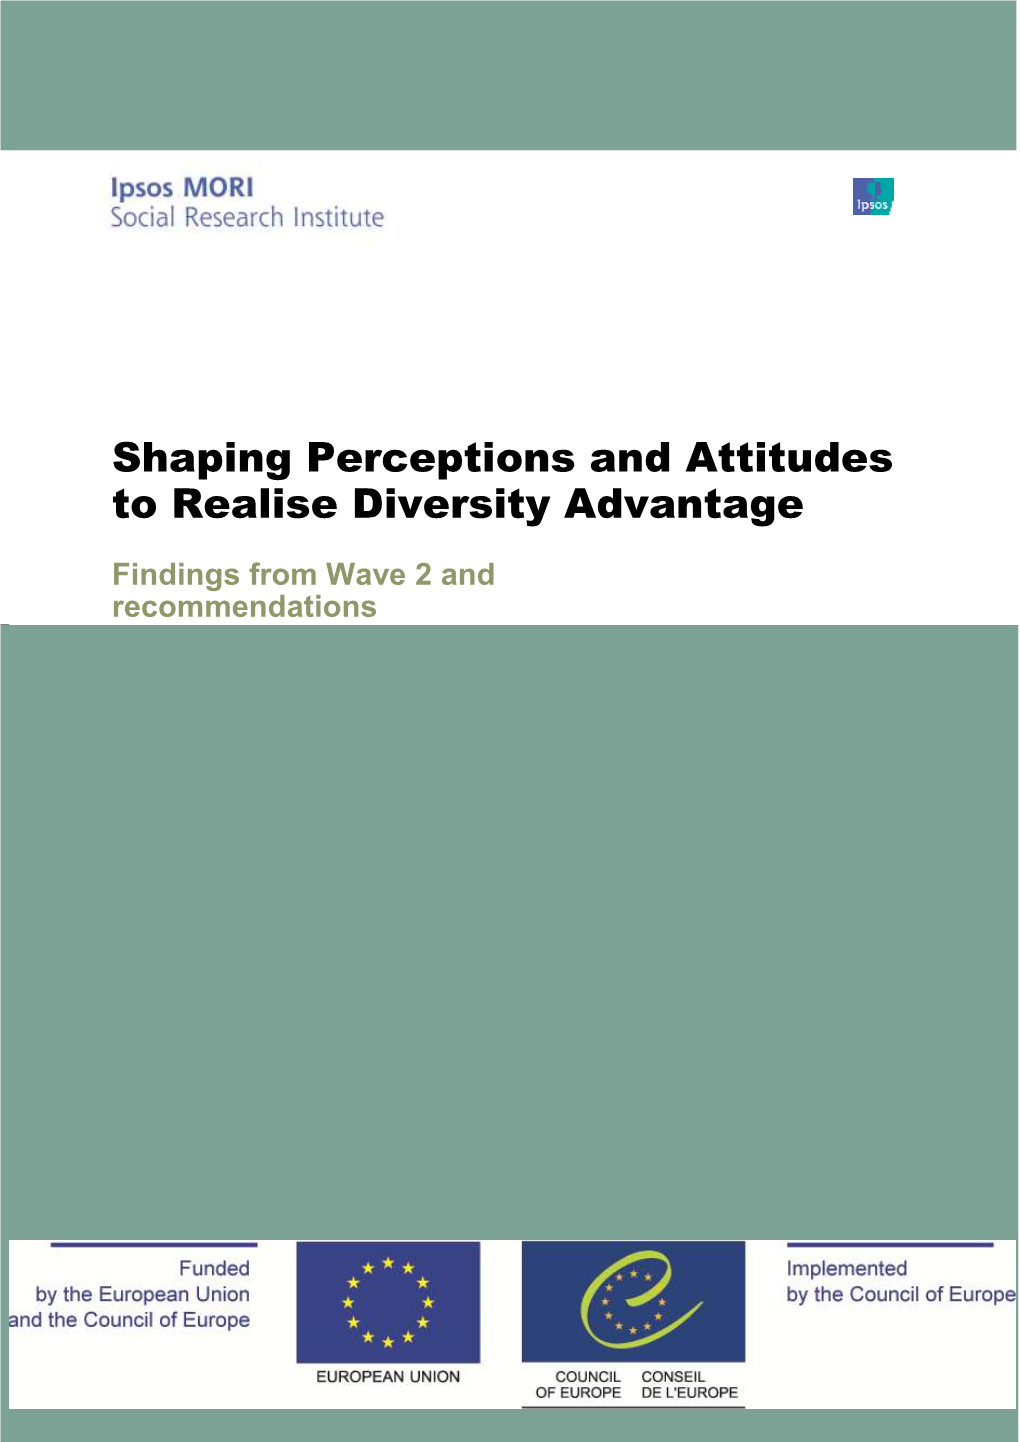 Shaping Perceptions and Attitudes to Realise Diversity Advantage